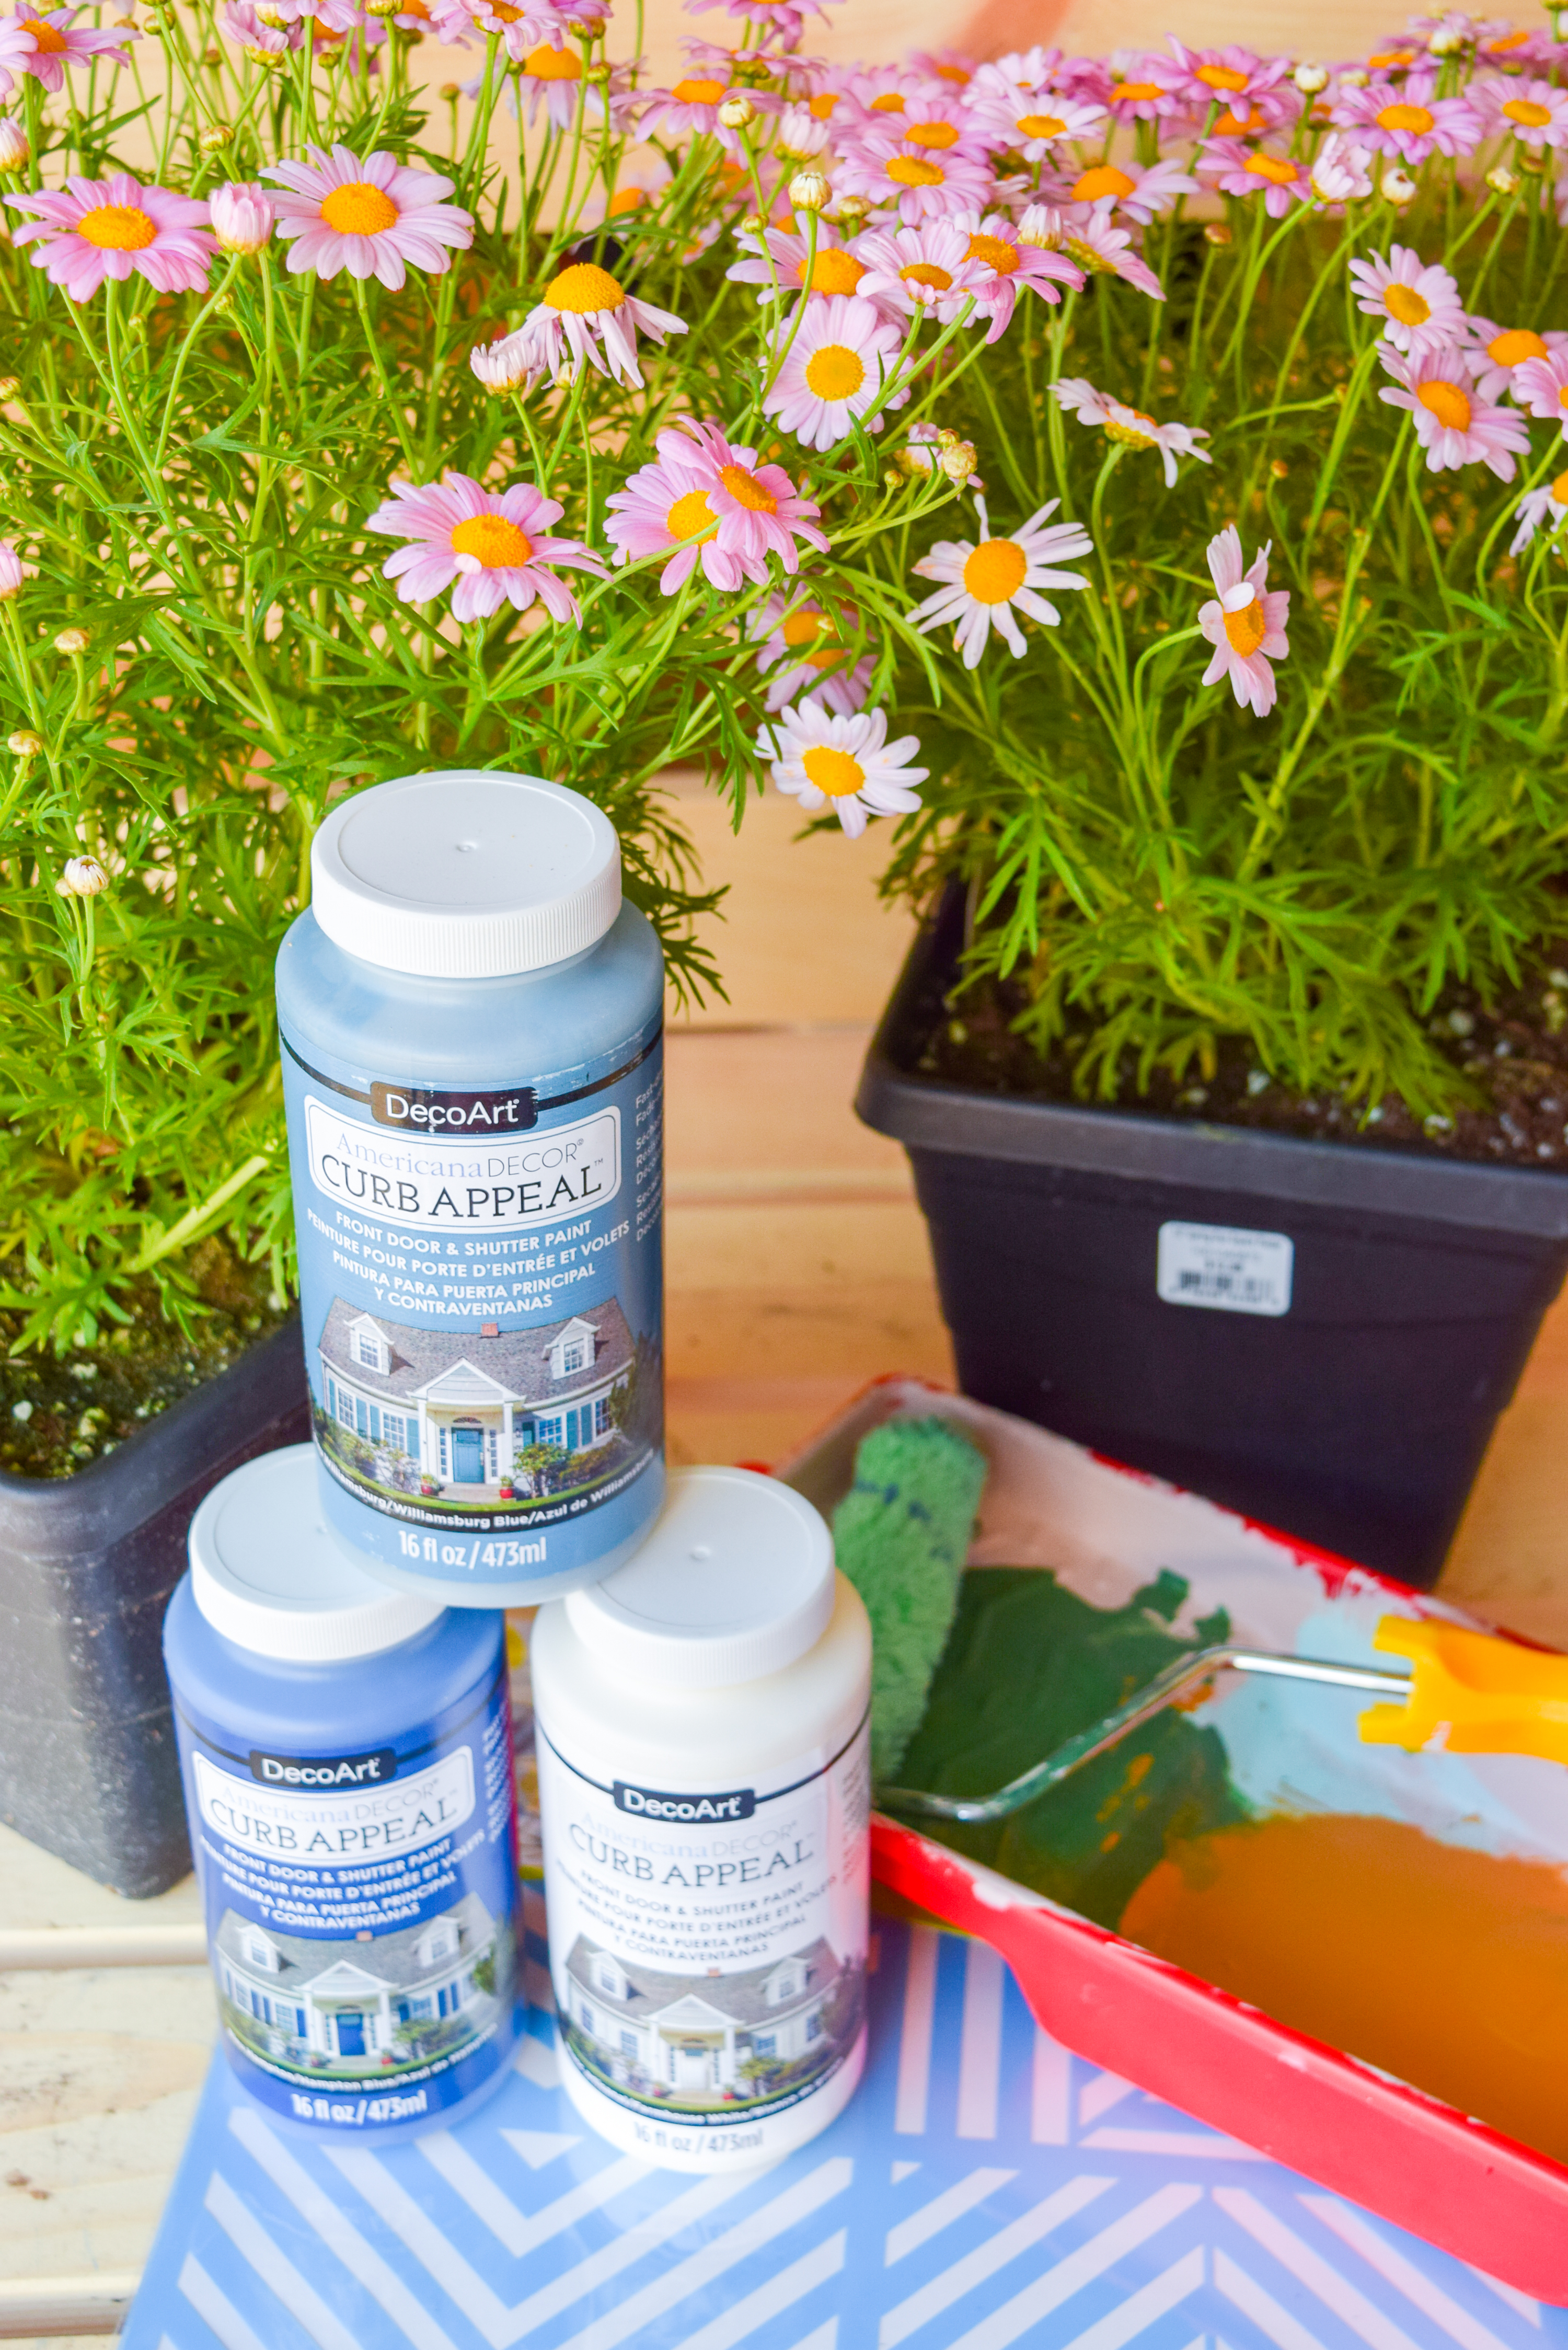 Looking for a renter friendly update to your backyard in time for summer? Try painted some cement pavers to look like patio tiles, using Decoart's Curb Appeal line of paints.